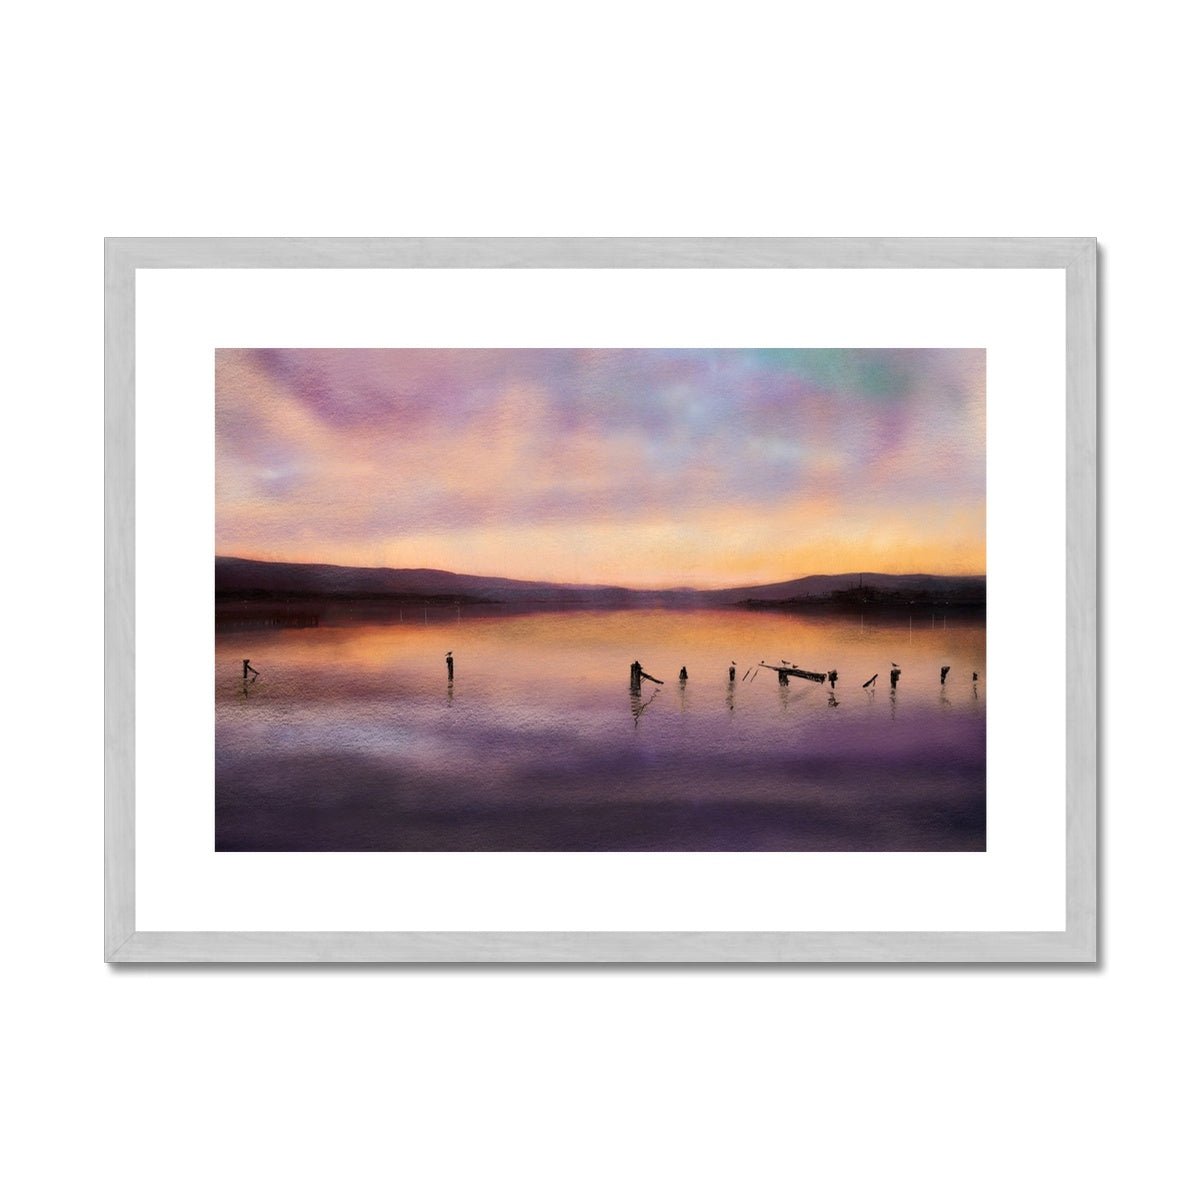 Admiralty Jetty Dusk Painting | Antique Framed & Mounted Prints From Scotland-Antique Framed & Mounted Prints-River Clyde Art Gallery-A2 Landscape-Silver Frame-Paintings, Prints, Homeware, Art Gifts From Scotland By Scottish Artist Kevin Hunter